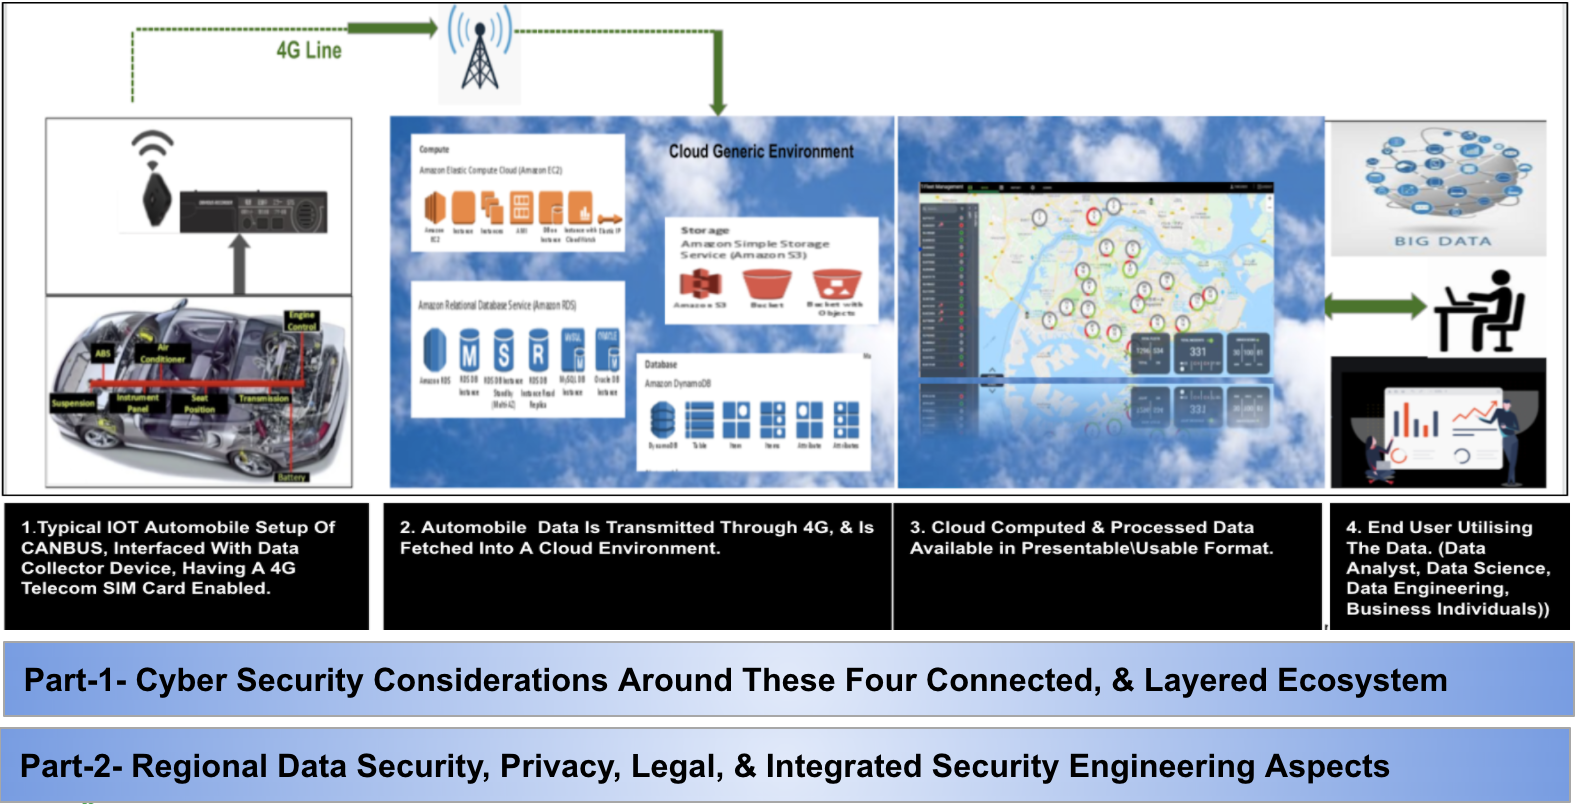 Cyber Security ecosystem in the world of IoT & shared mobility